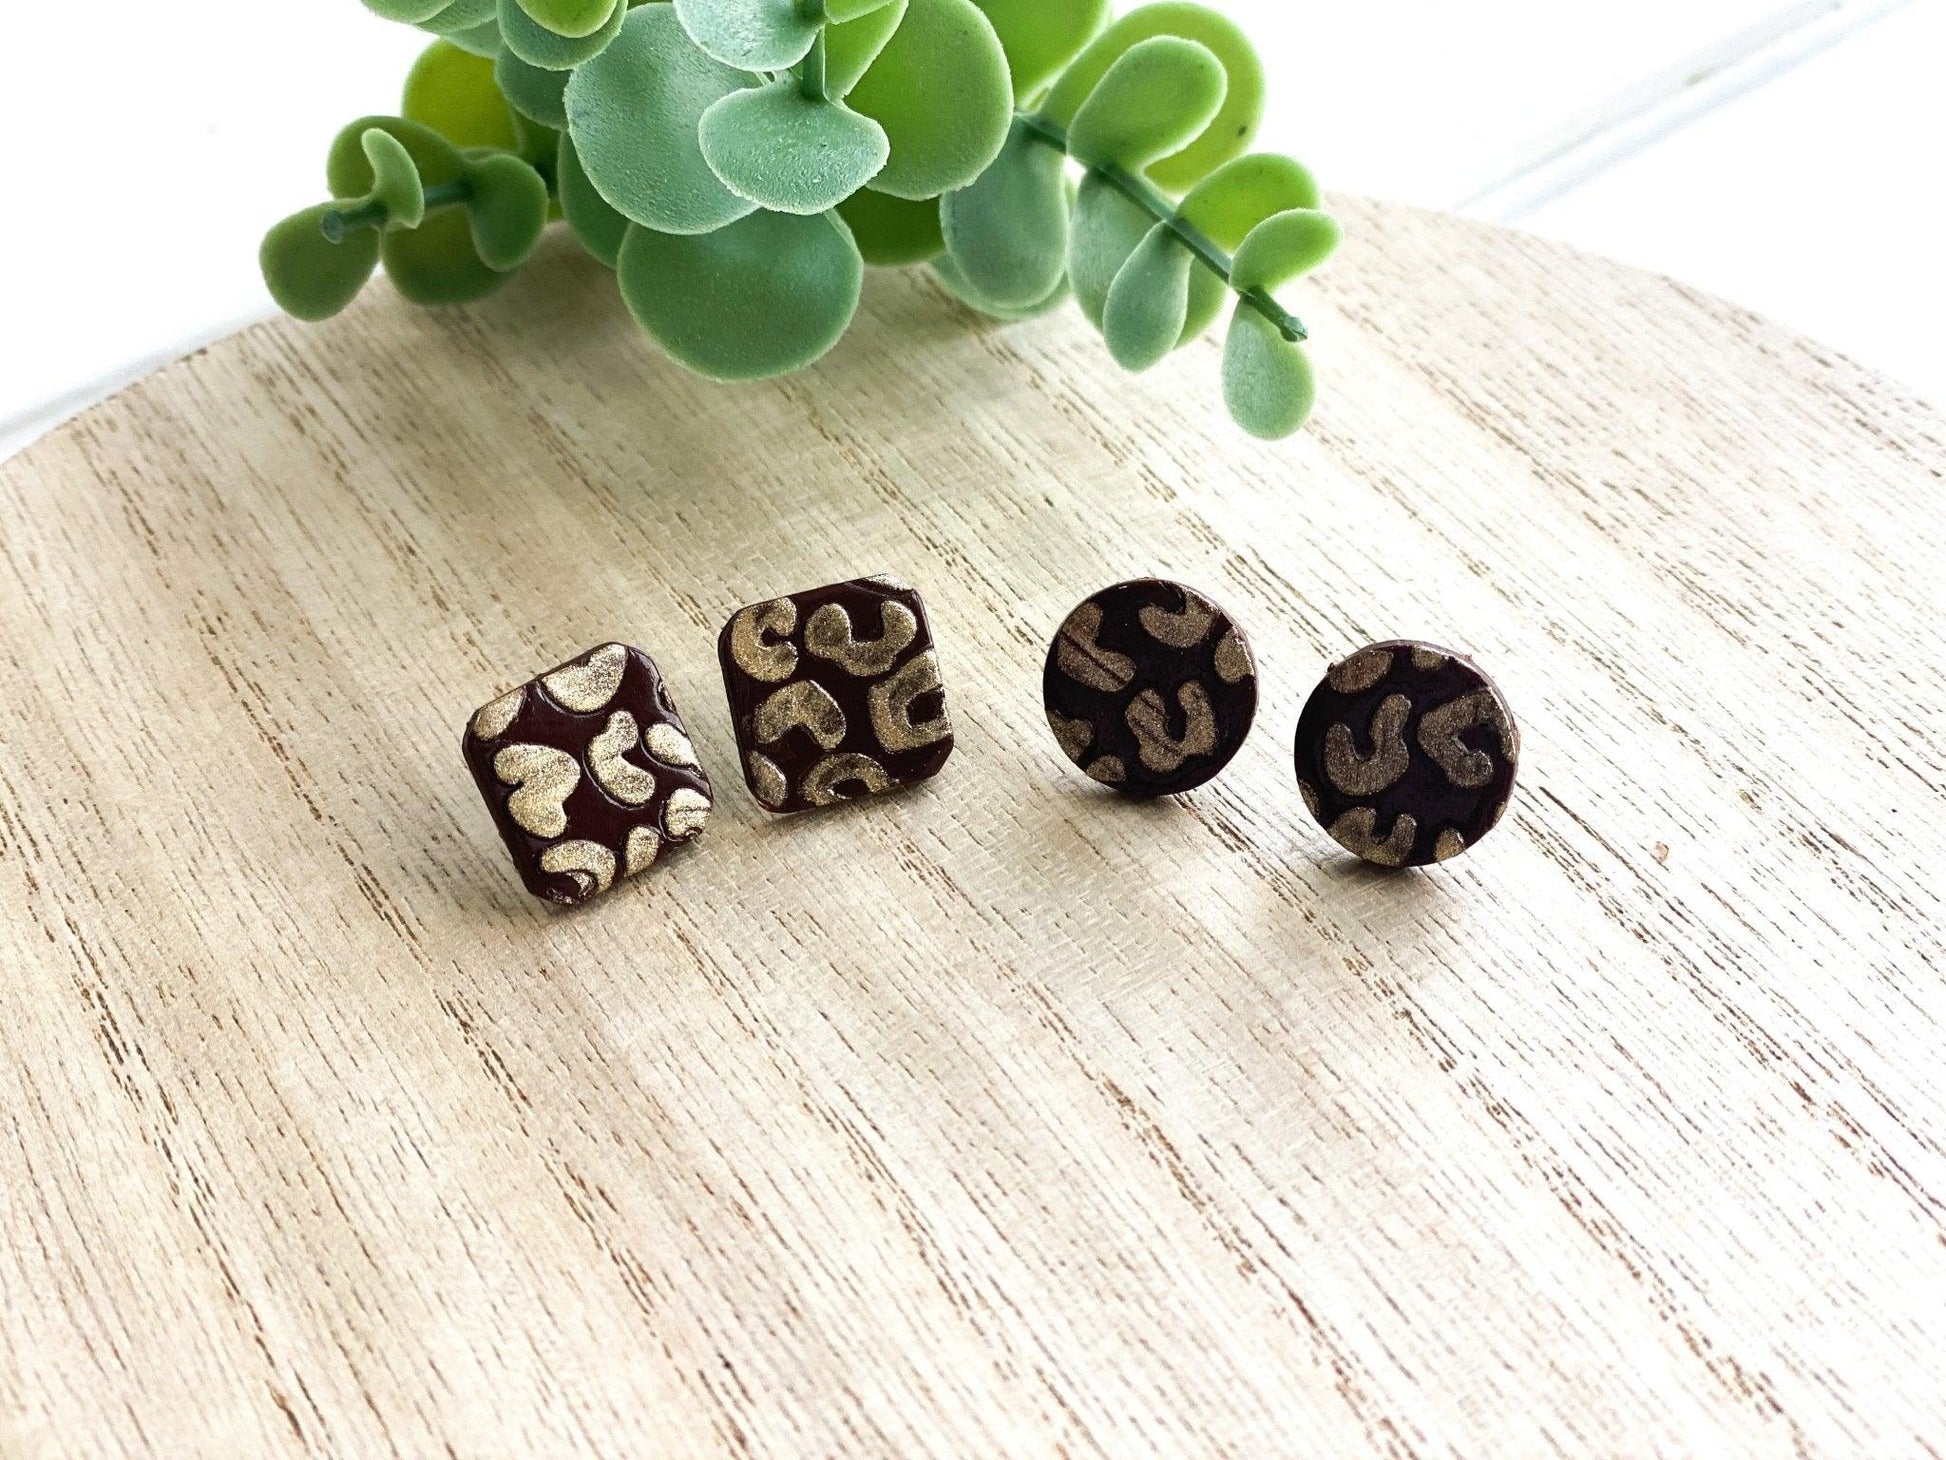 Unleash Your Wild Side: Chic Leopard Print Stud Earrings – Perfect for Fashionable & Sensitive Ears! - Harbor to Gulf Co.